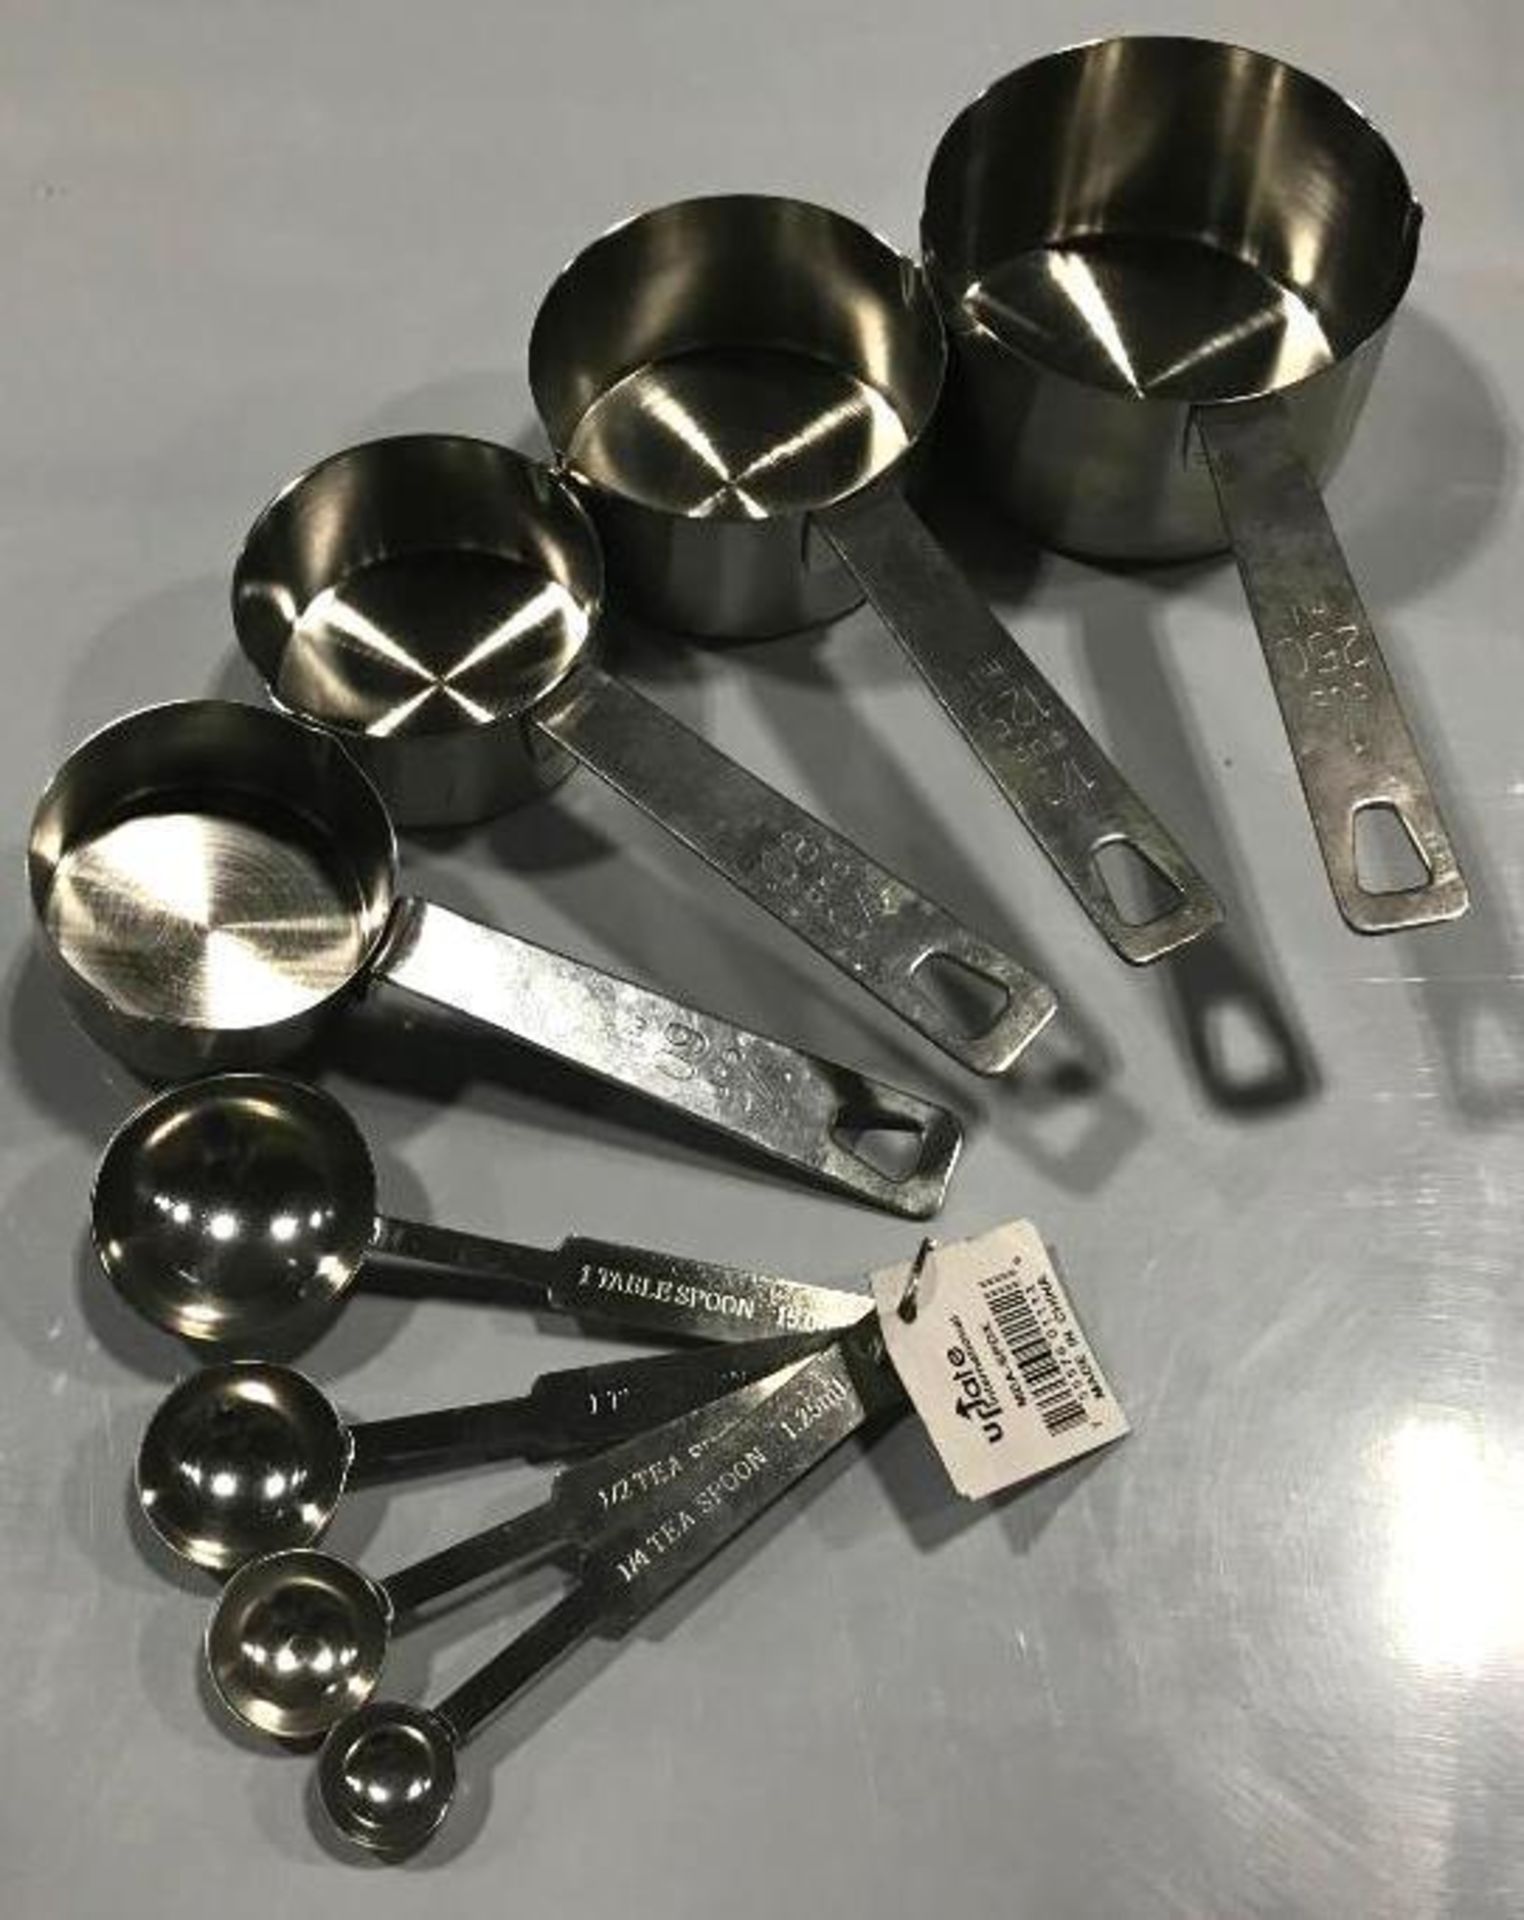 UPDATE STAINLESS STEEL MEASURING CUPS SET OF 4 & UPDATE MEASURING SPOONS SET OF 4 - NEW - Image 2 of 2